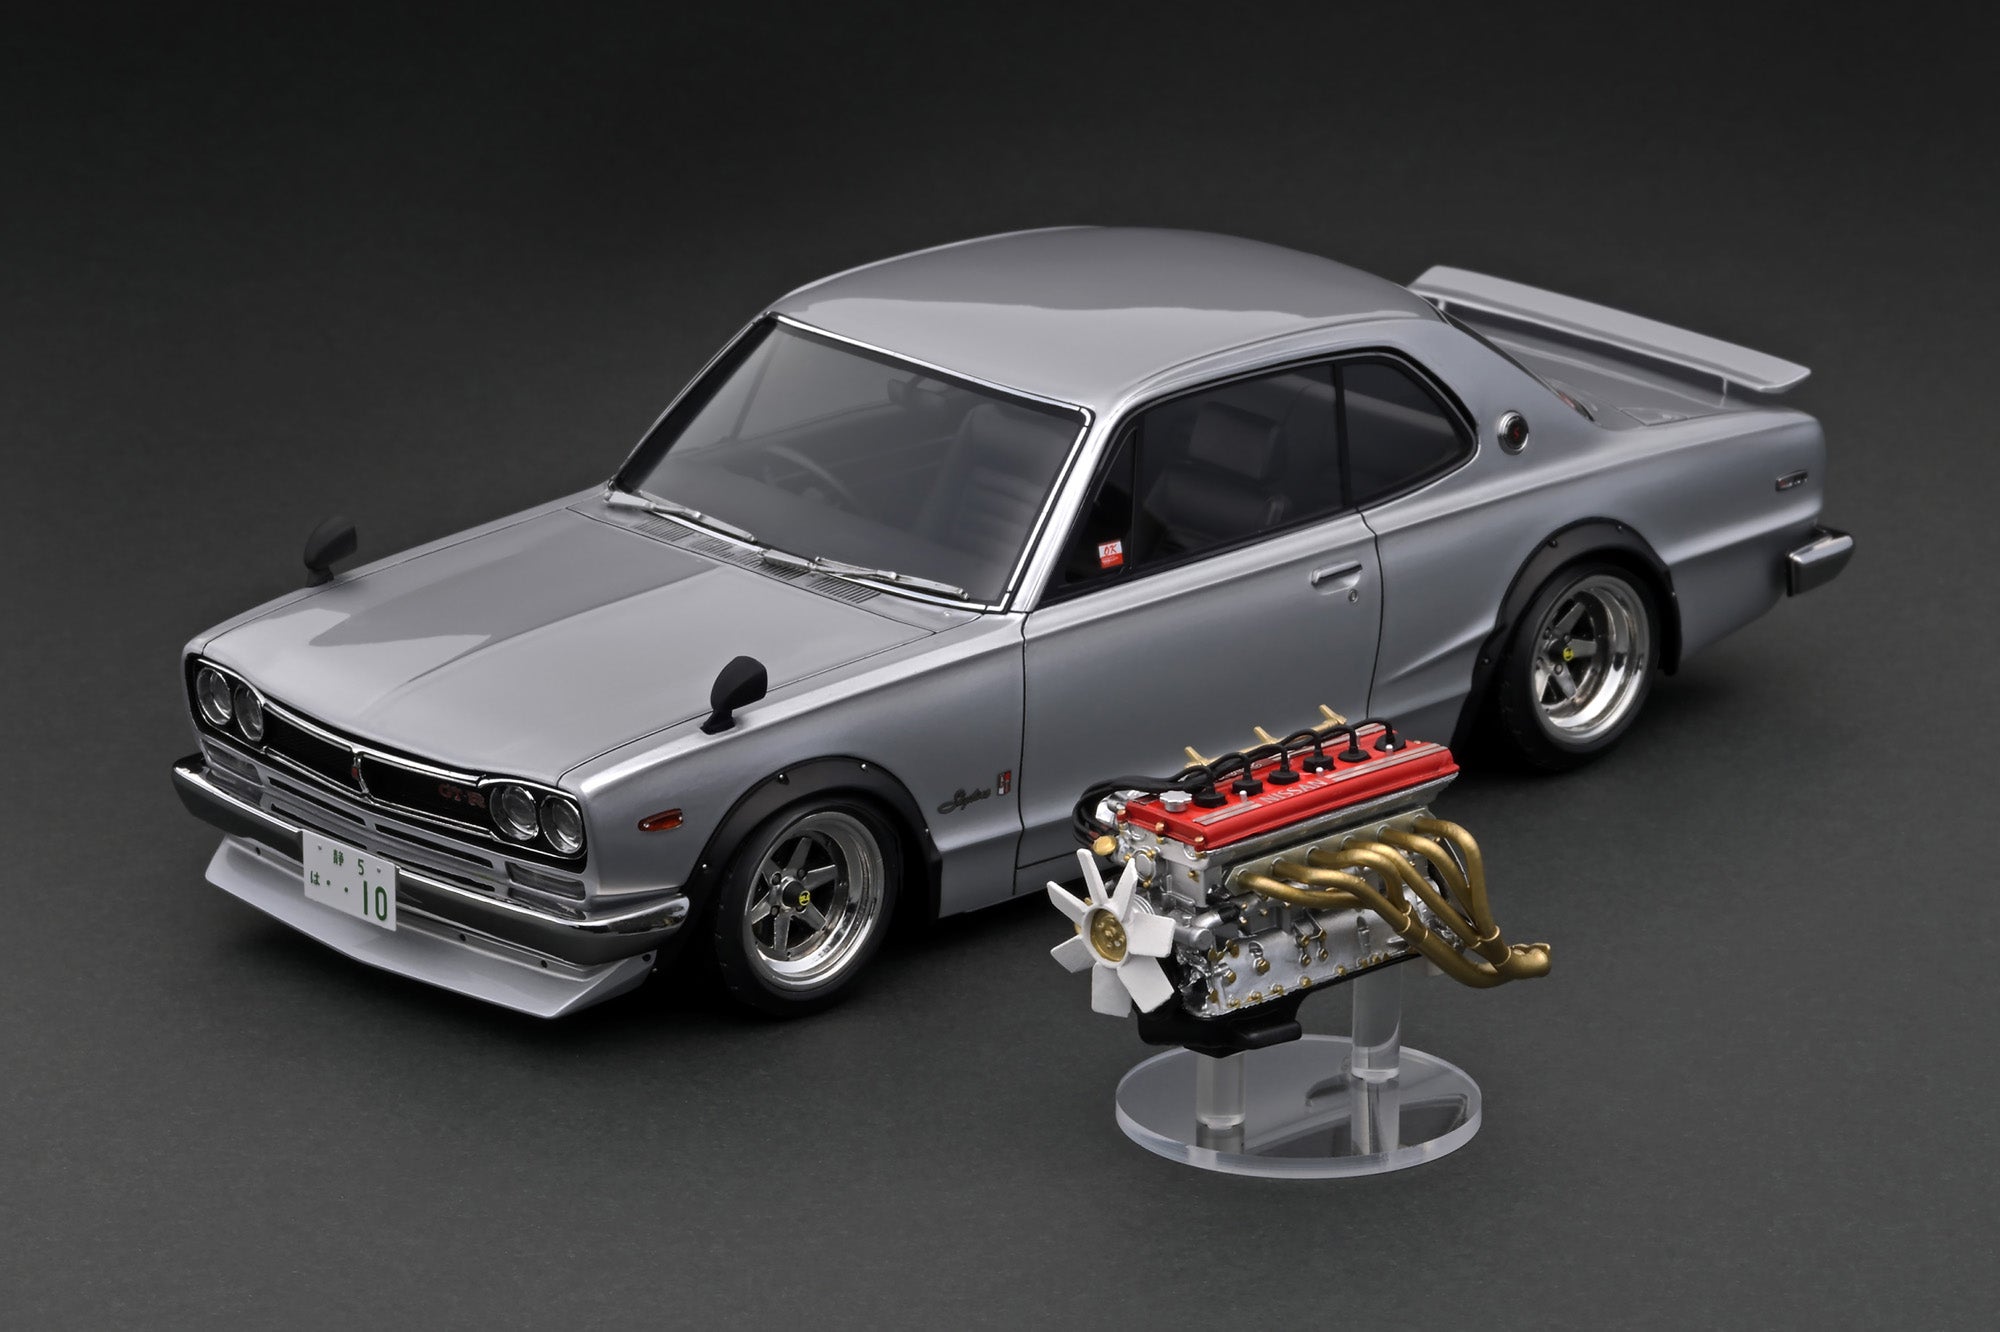 1/18 Scale Diecast – Hobby Express Inc.